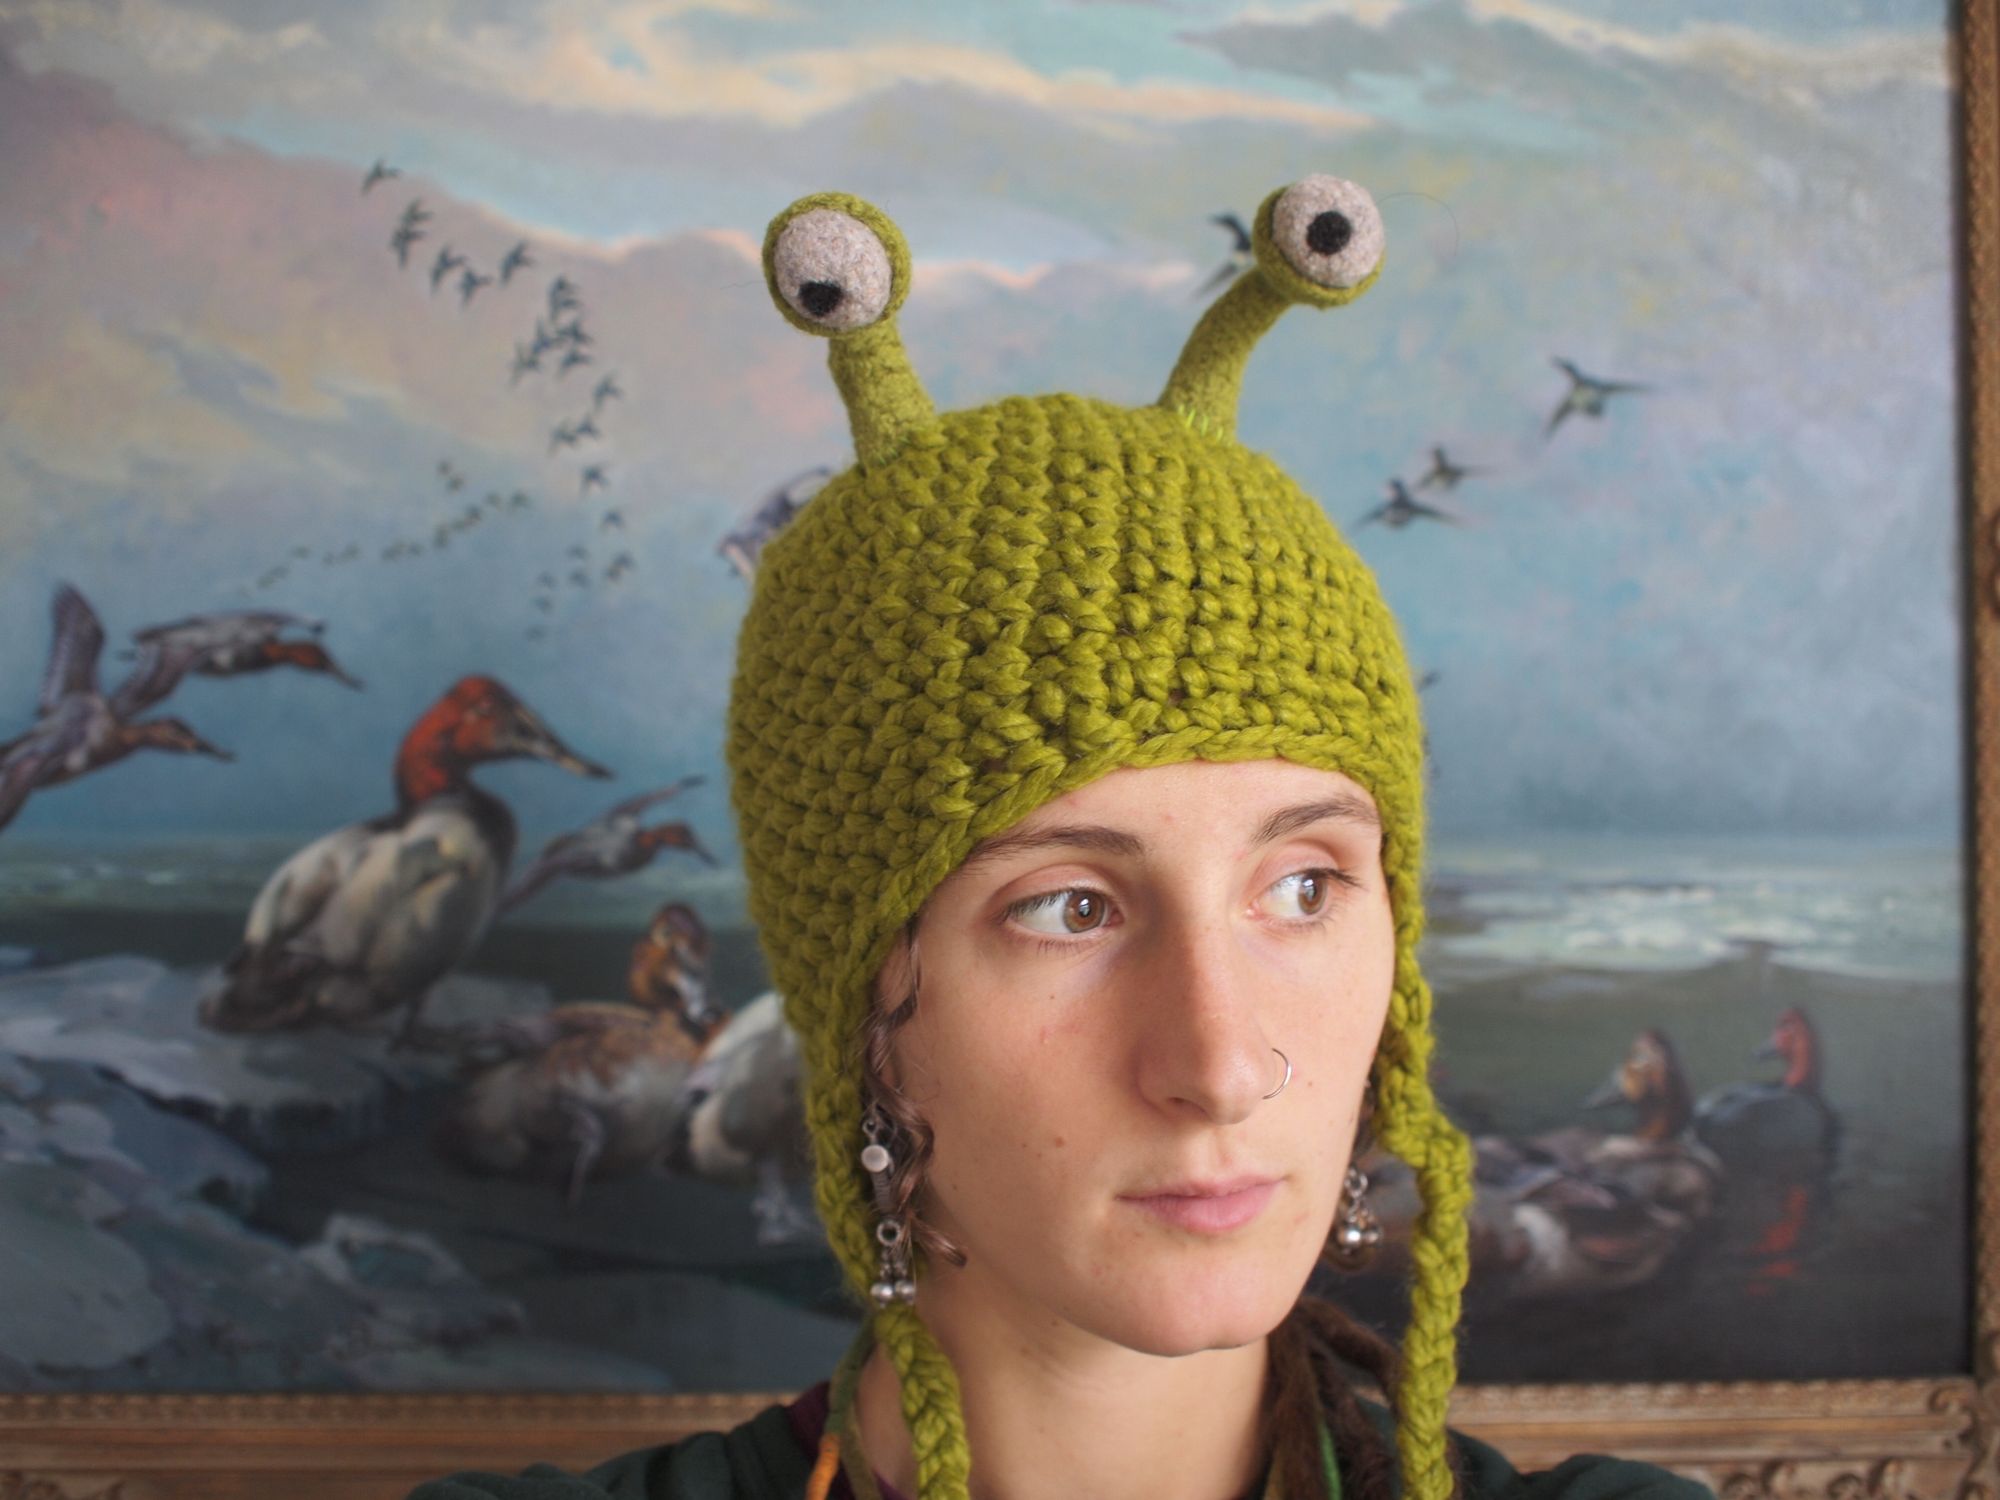 Woman wears a green hat with earflaps and stalked eyeballs in front of a painting with ducks.